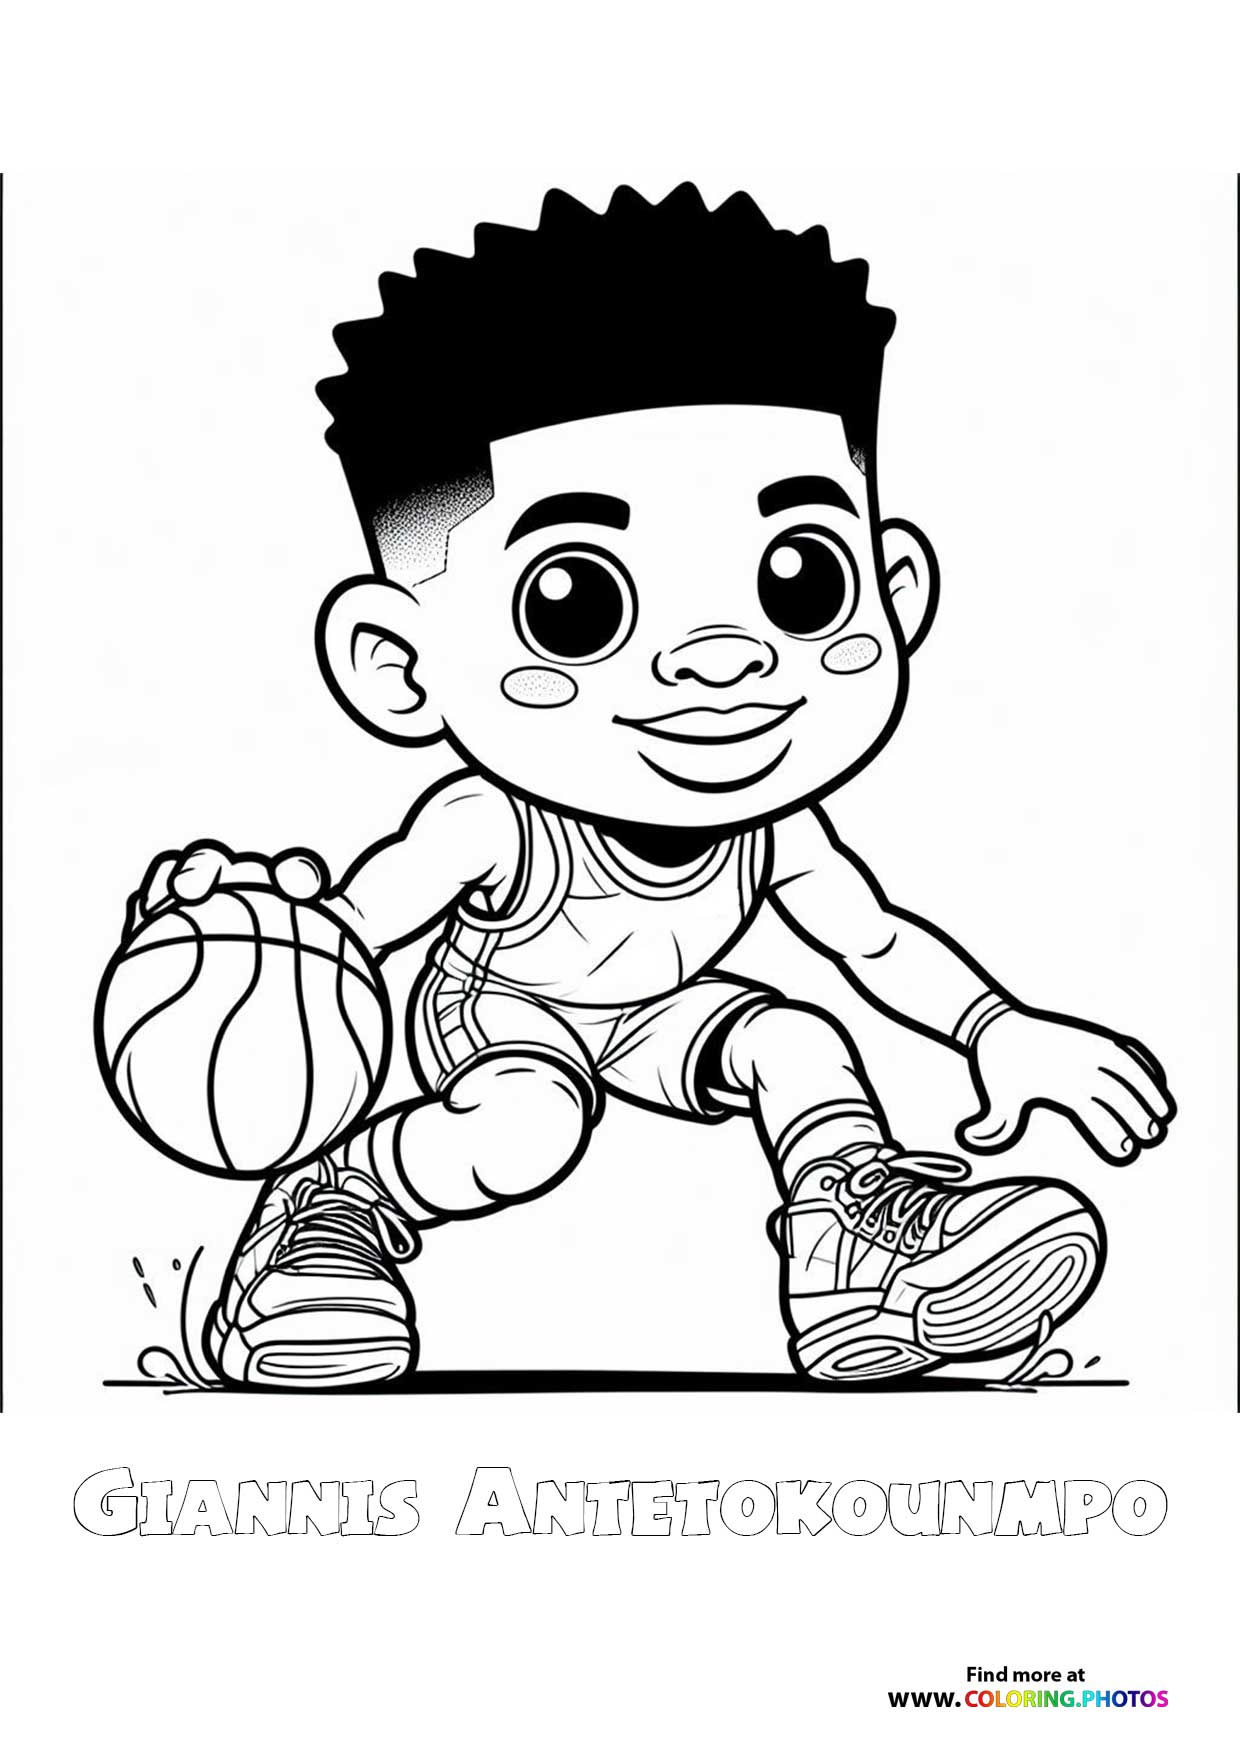 Cute Giannis Antetokounmpo - Coloring Pages for kids